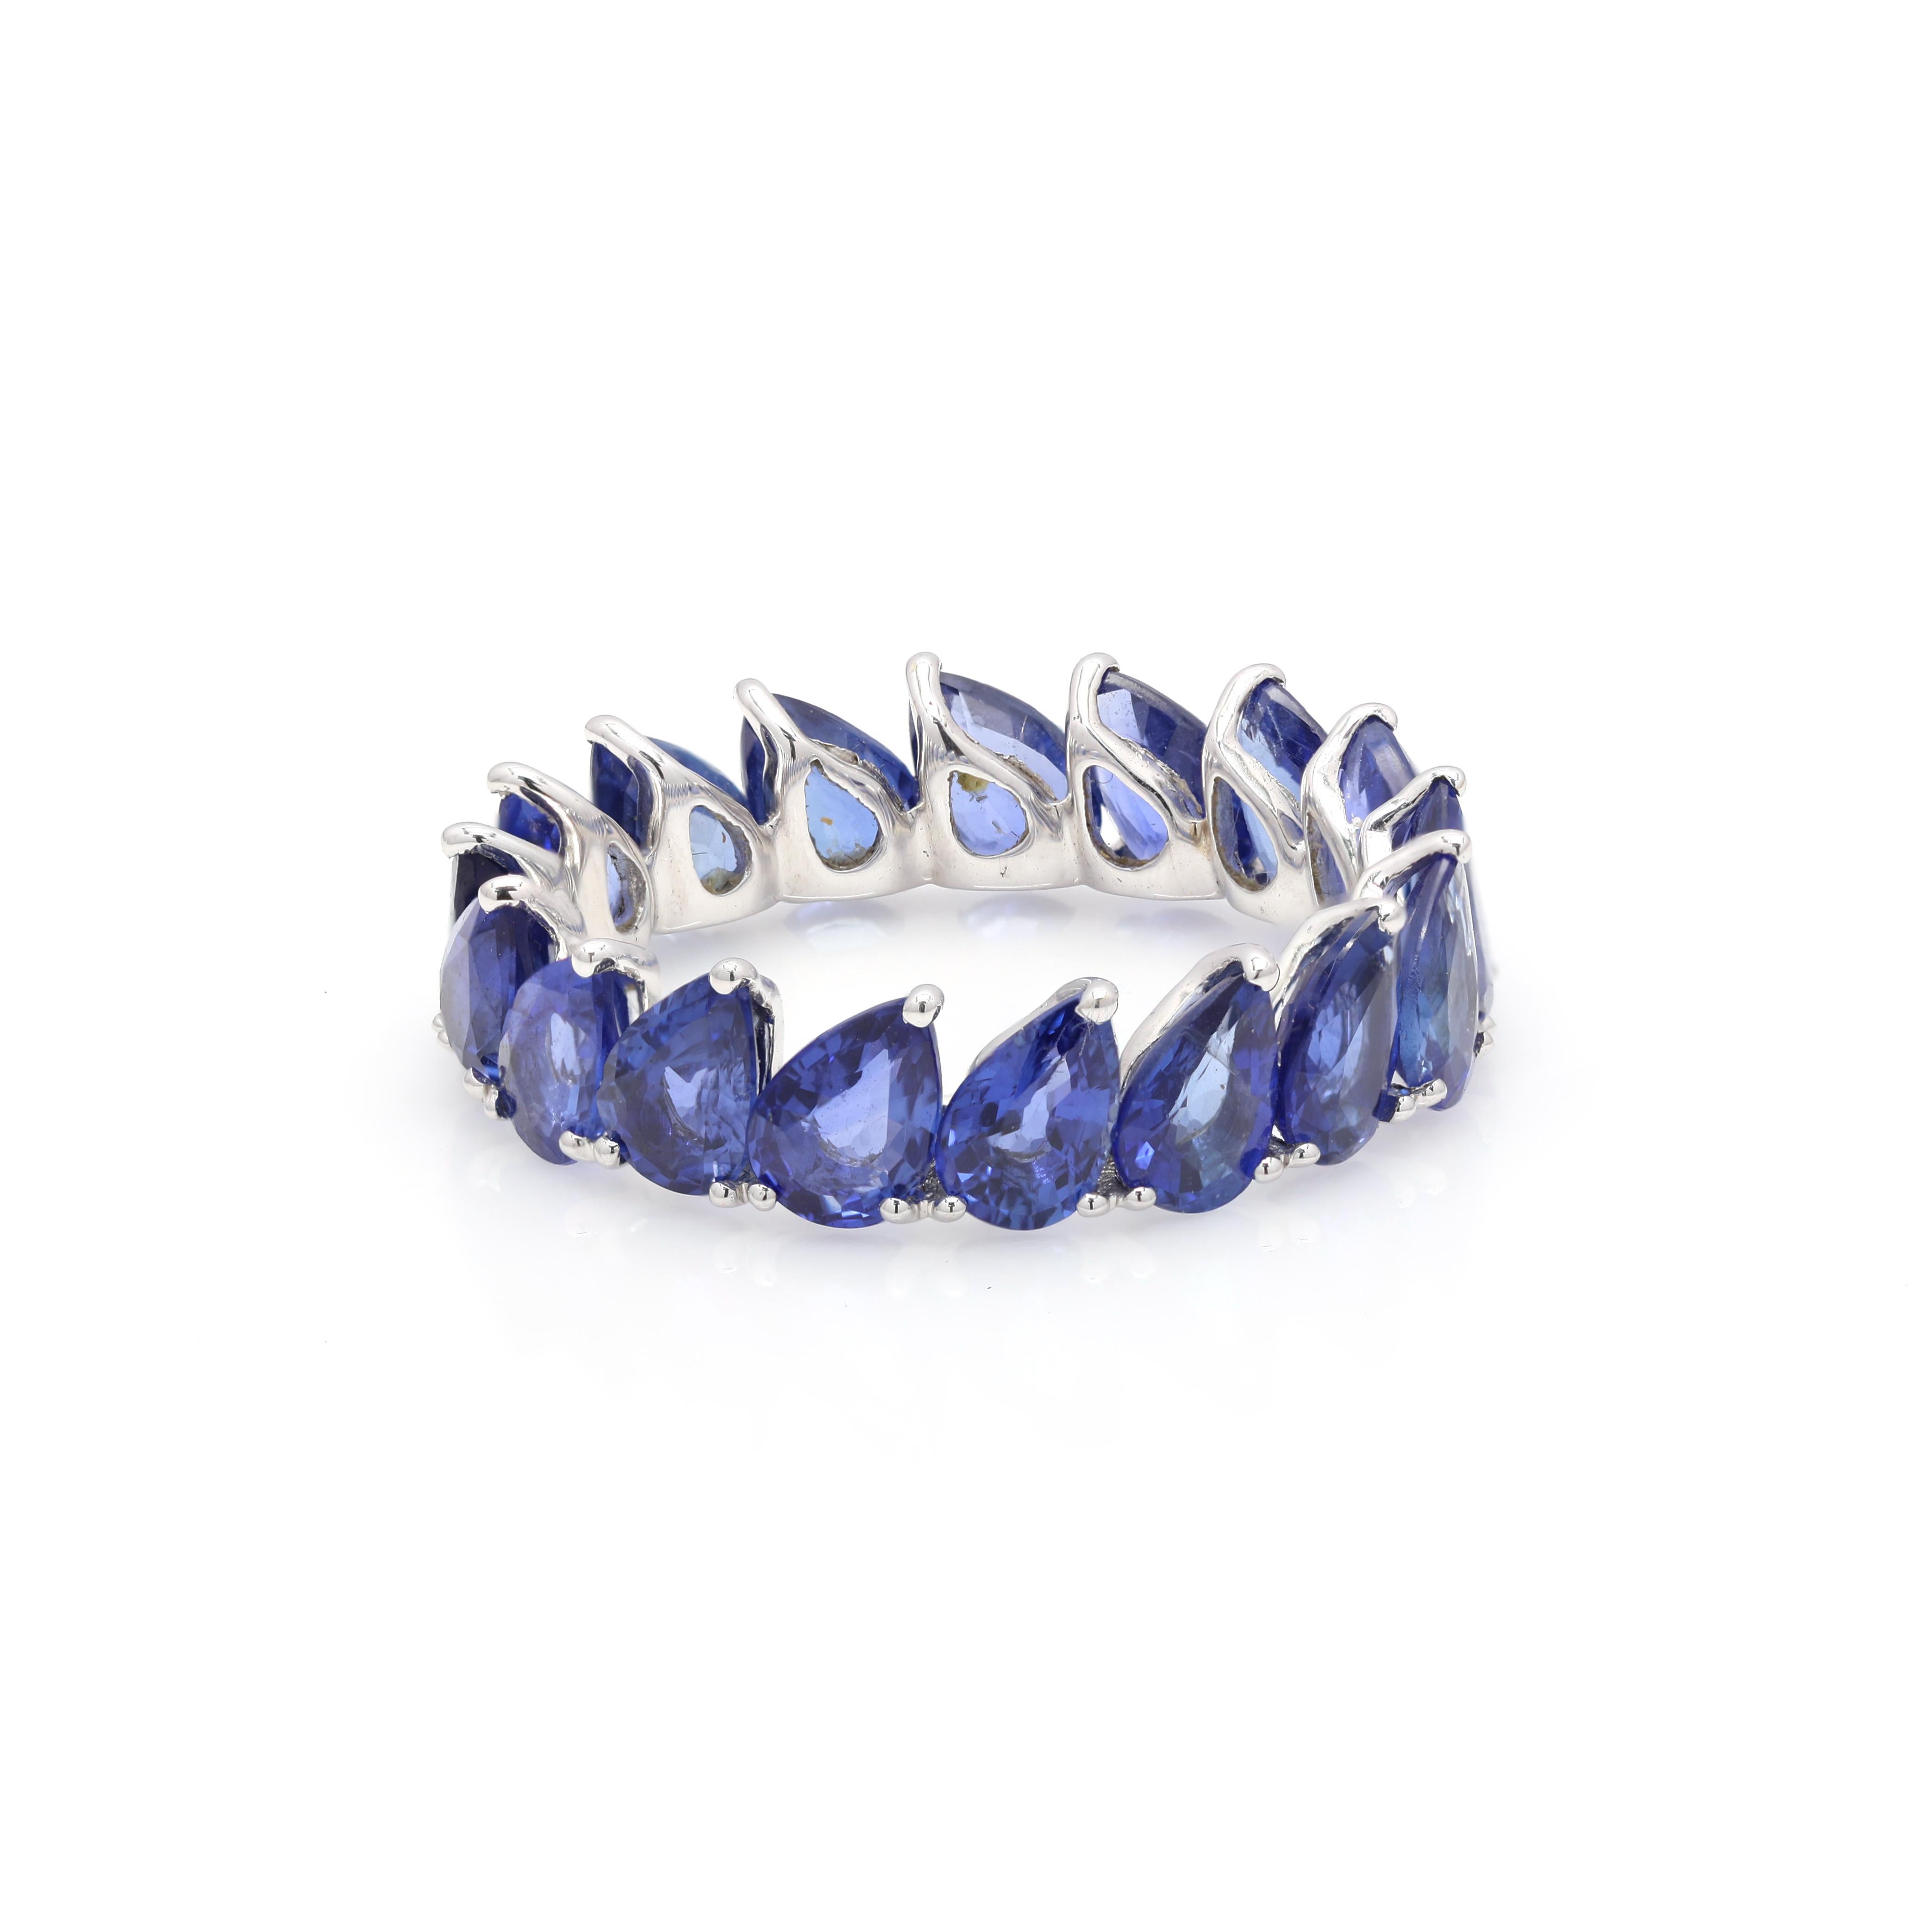 For Sale:  Designer 18K White Gold 8.24 ct Stackable Blue Sapphire Eternity Band Ring 2